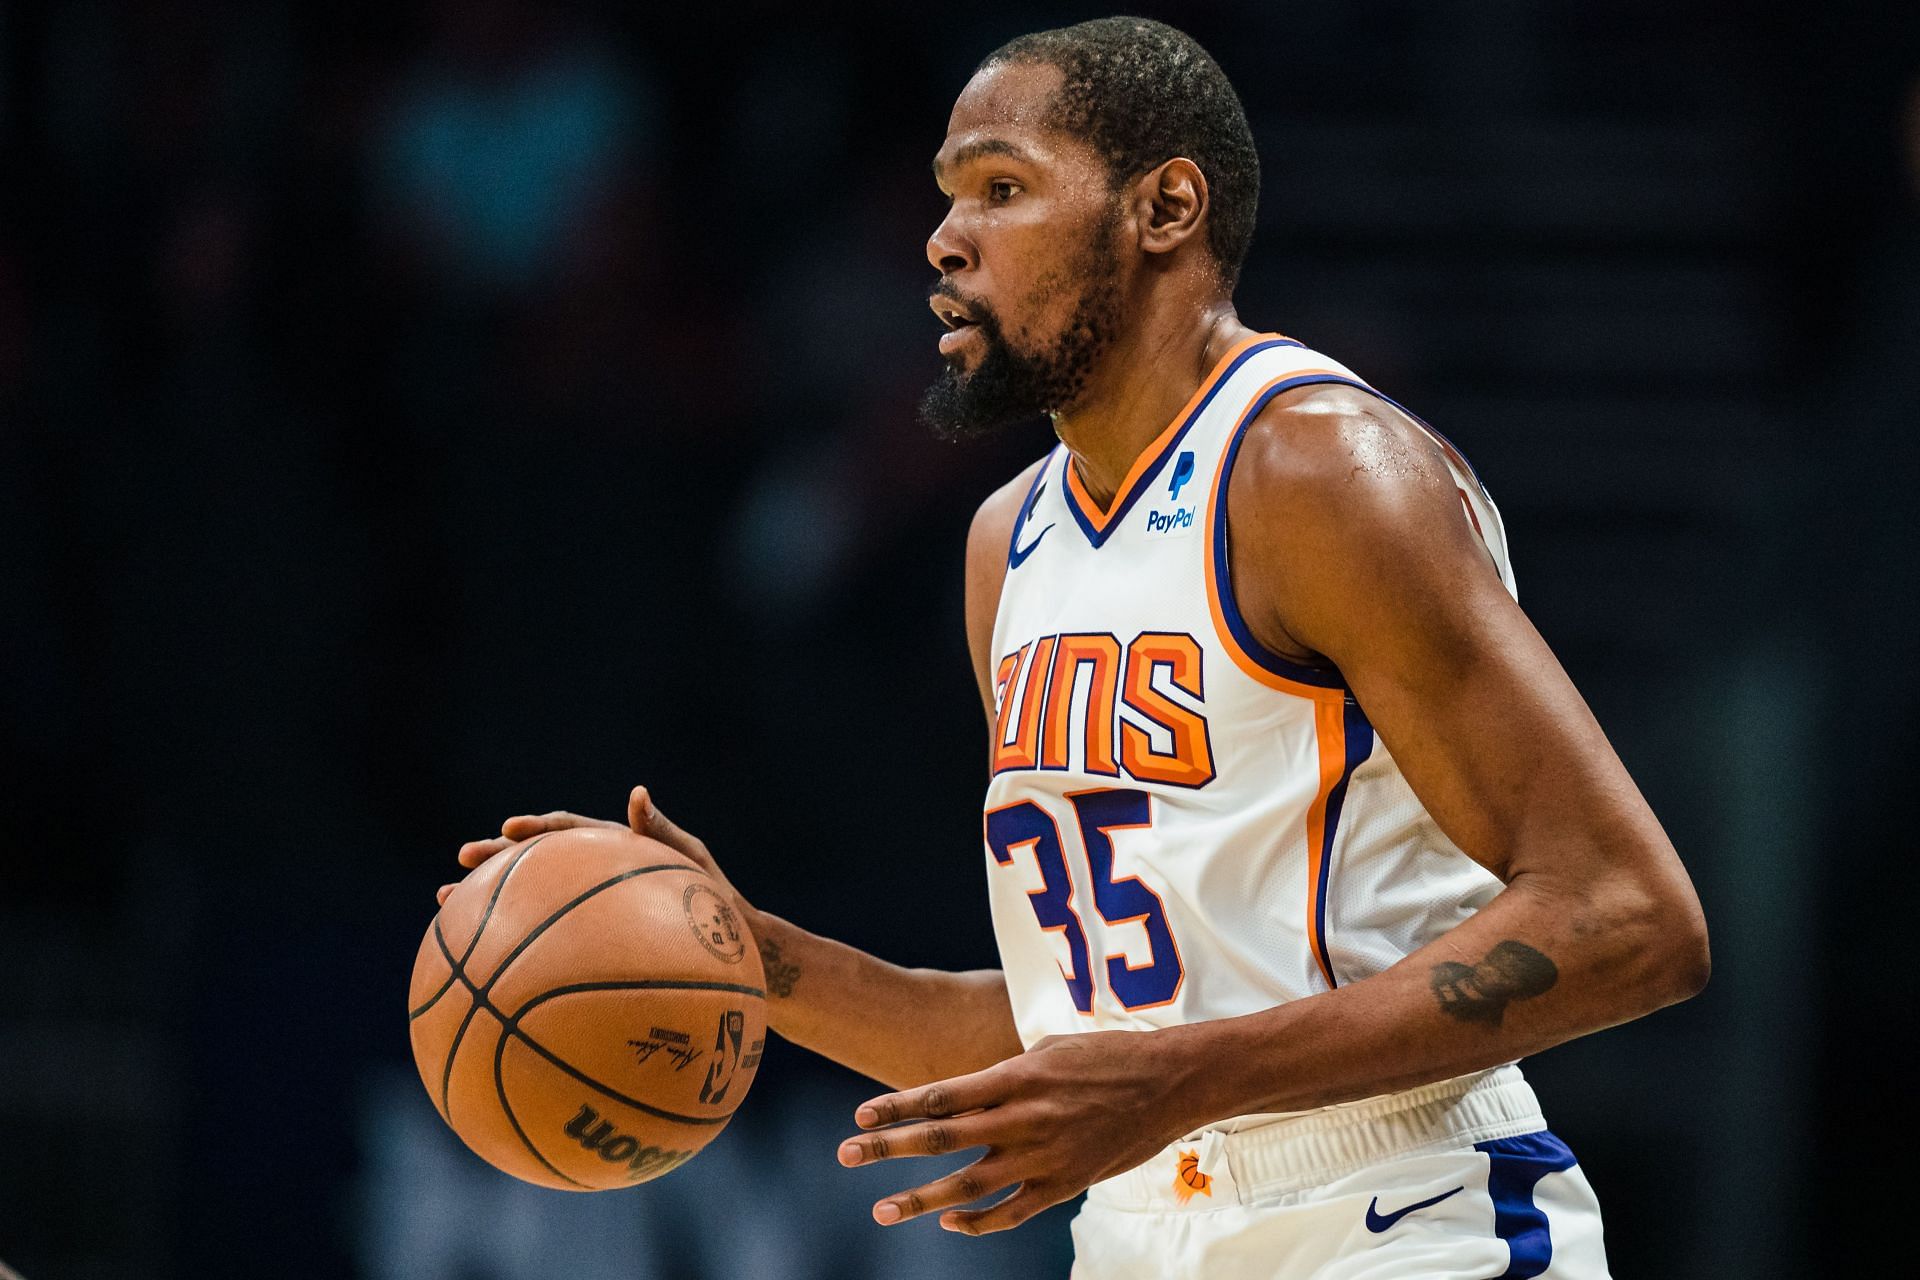 Kevin Durant drills go-ahead shot for Suns in win over Mavericks